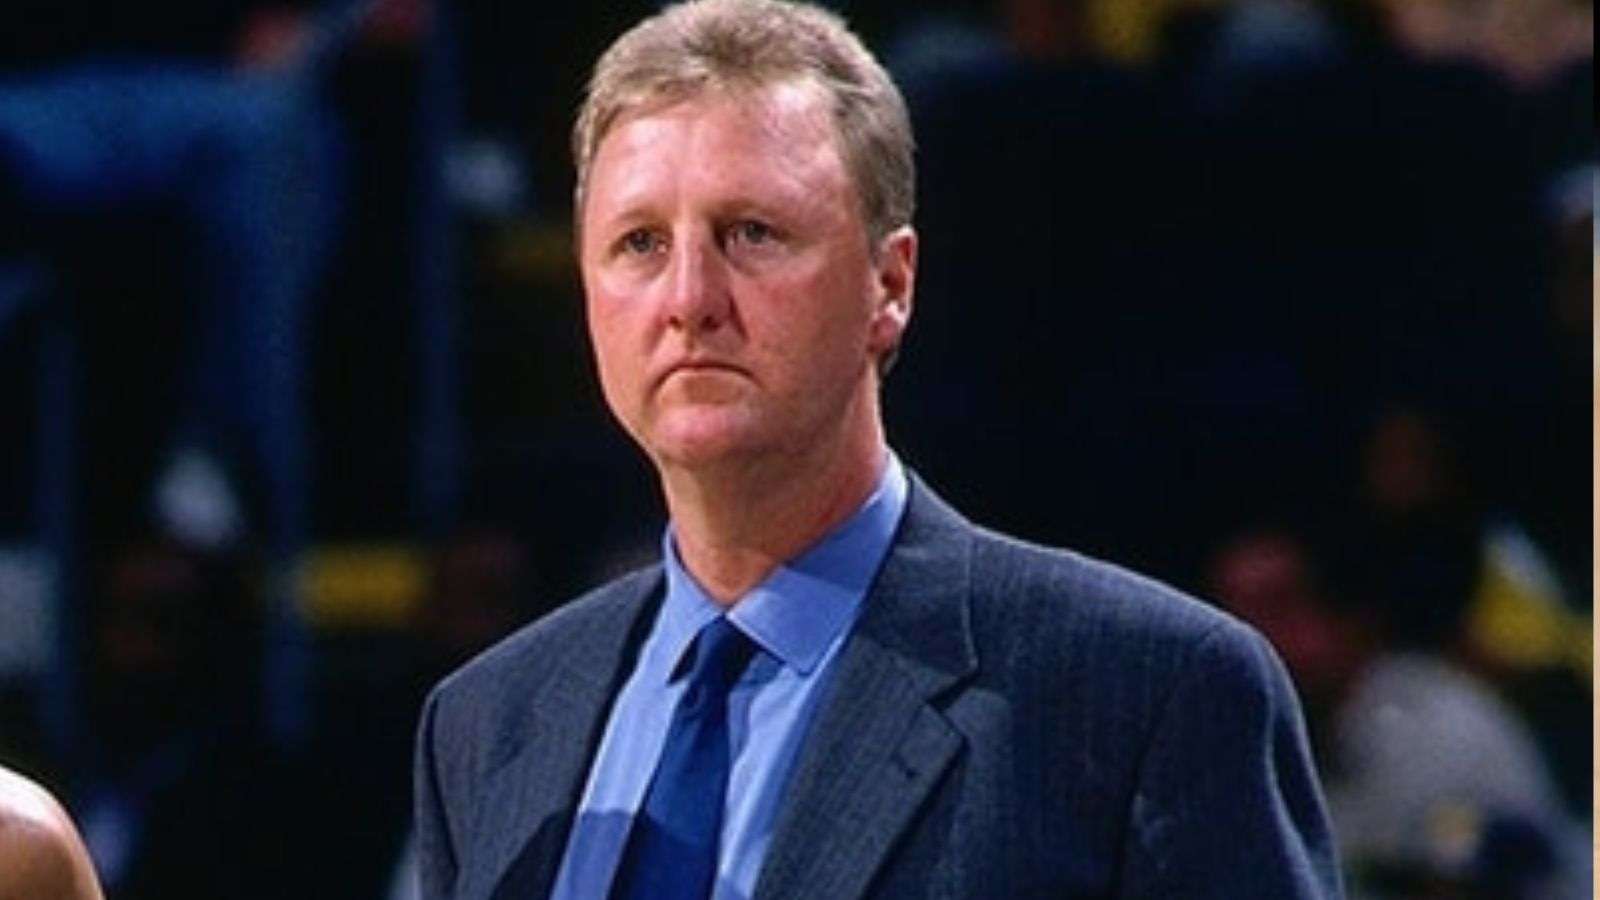 Larry Bird on the sidelines as the coach of the Indiana Pacers.